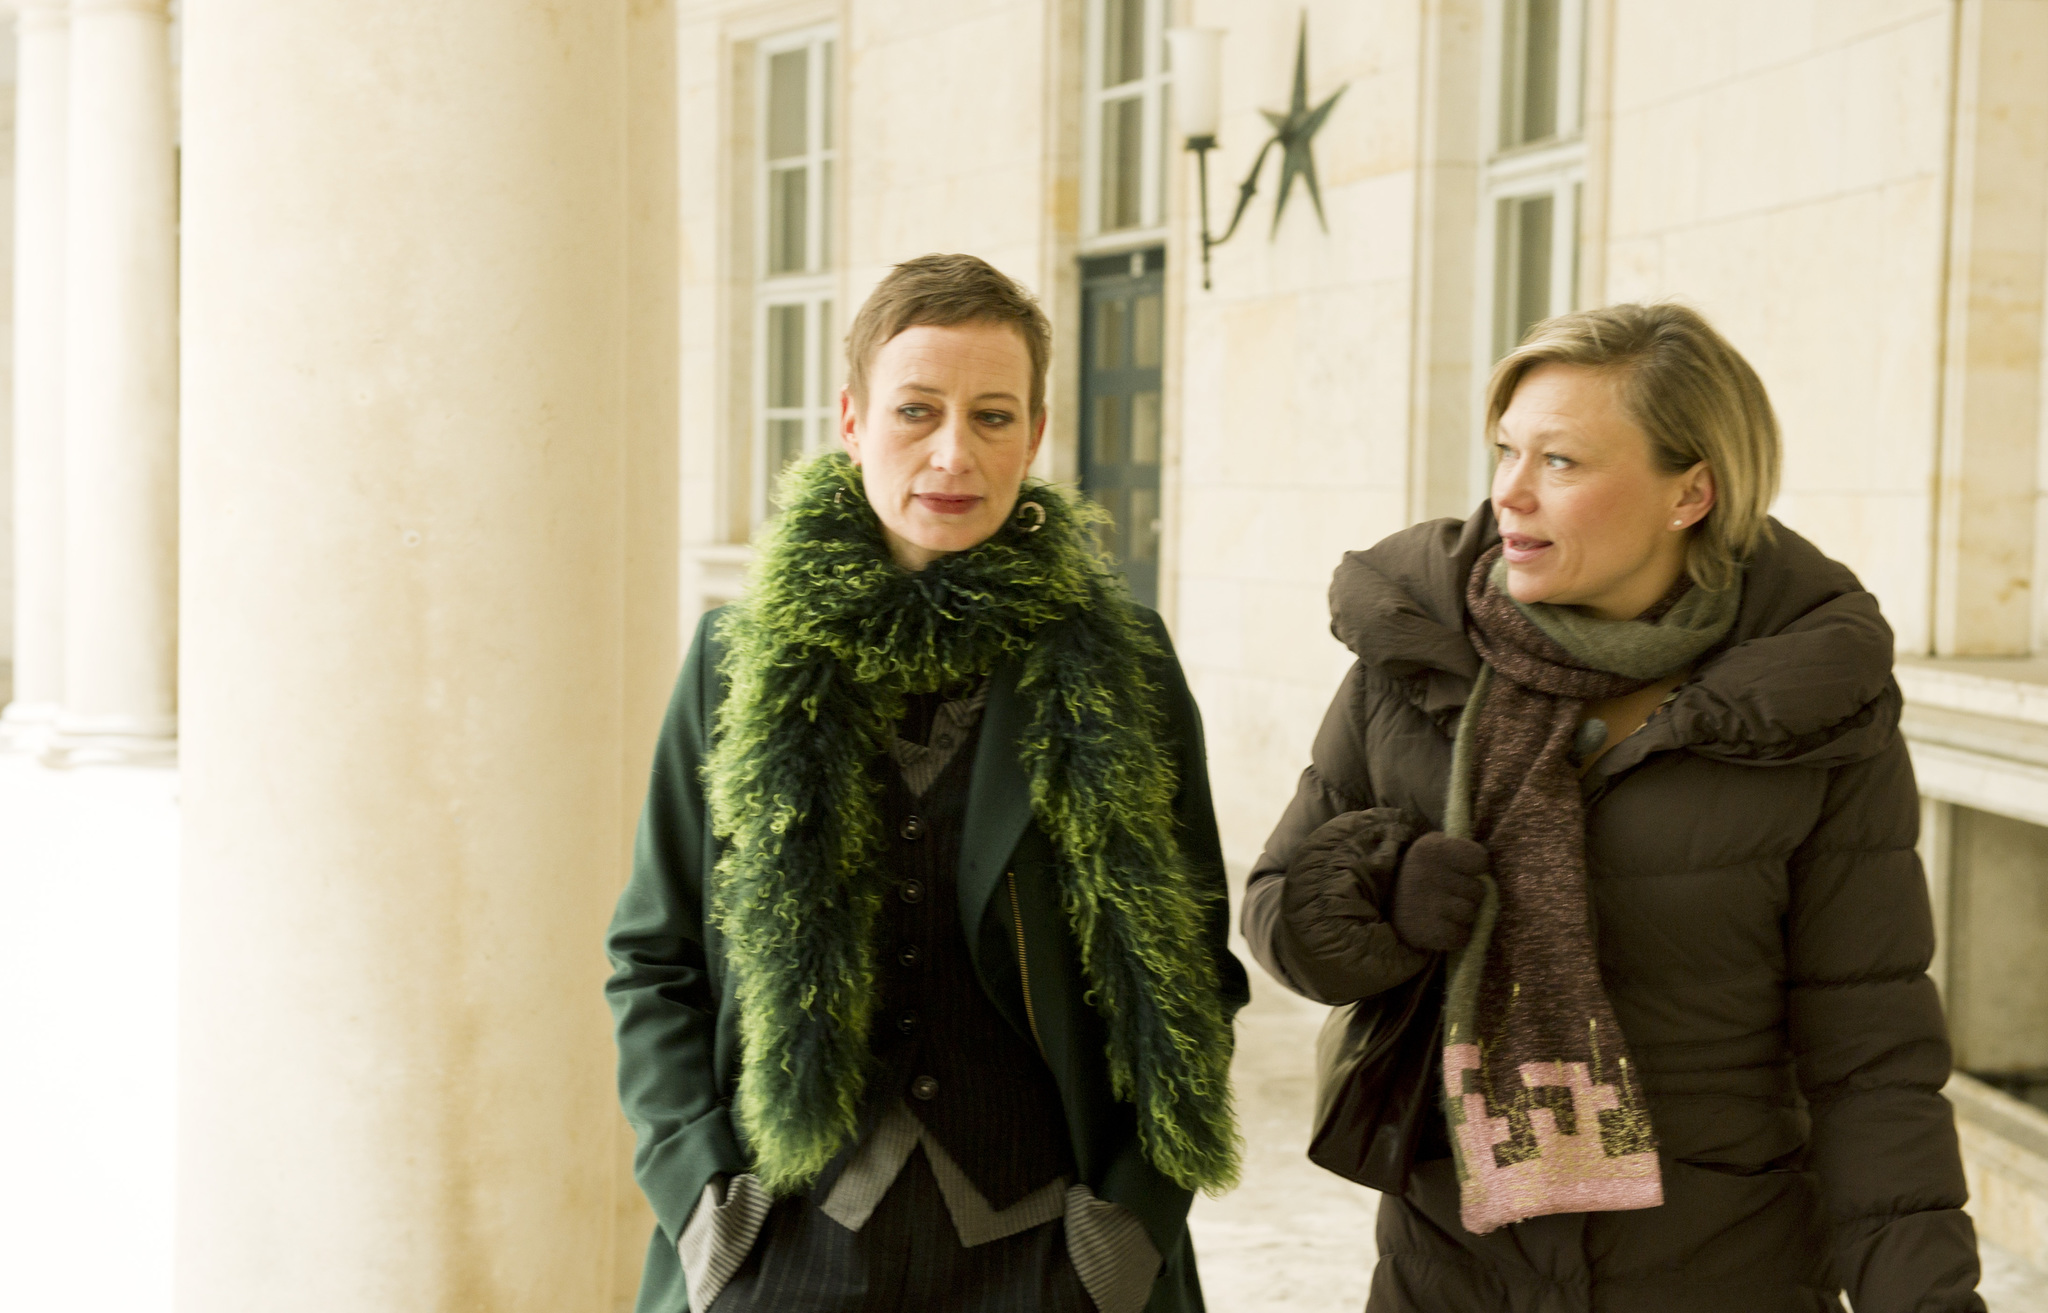 Still of Sarah Boberg and Sofie Stougaard in Bron/Broen (2011)